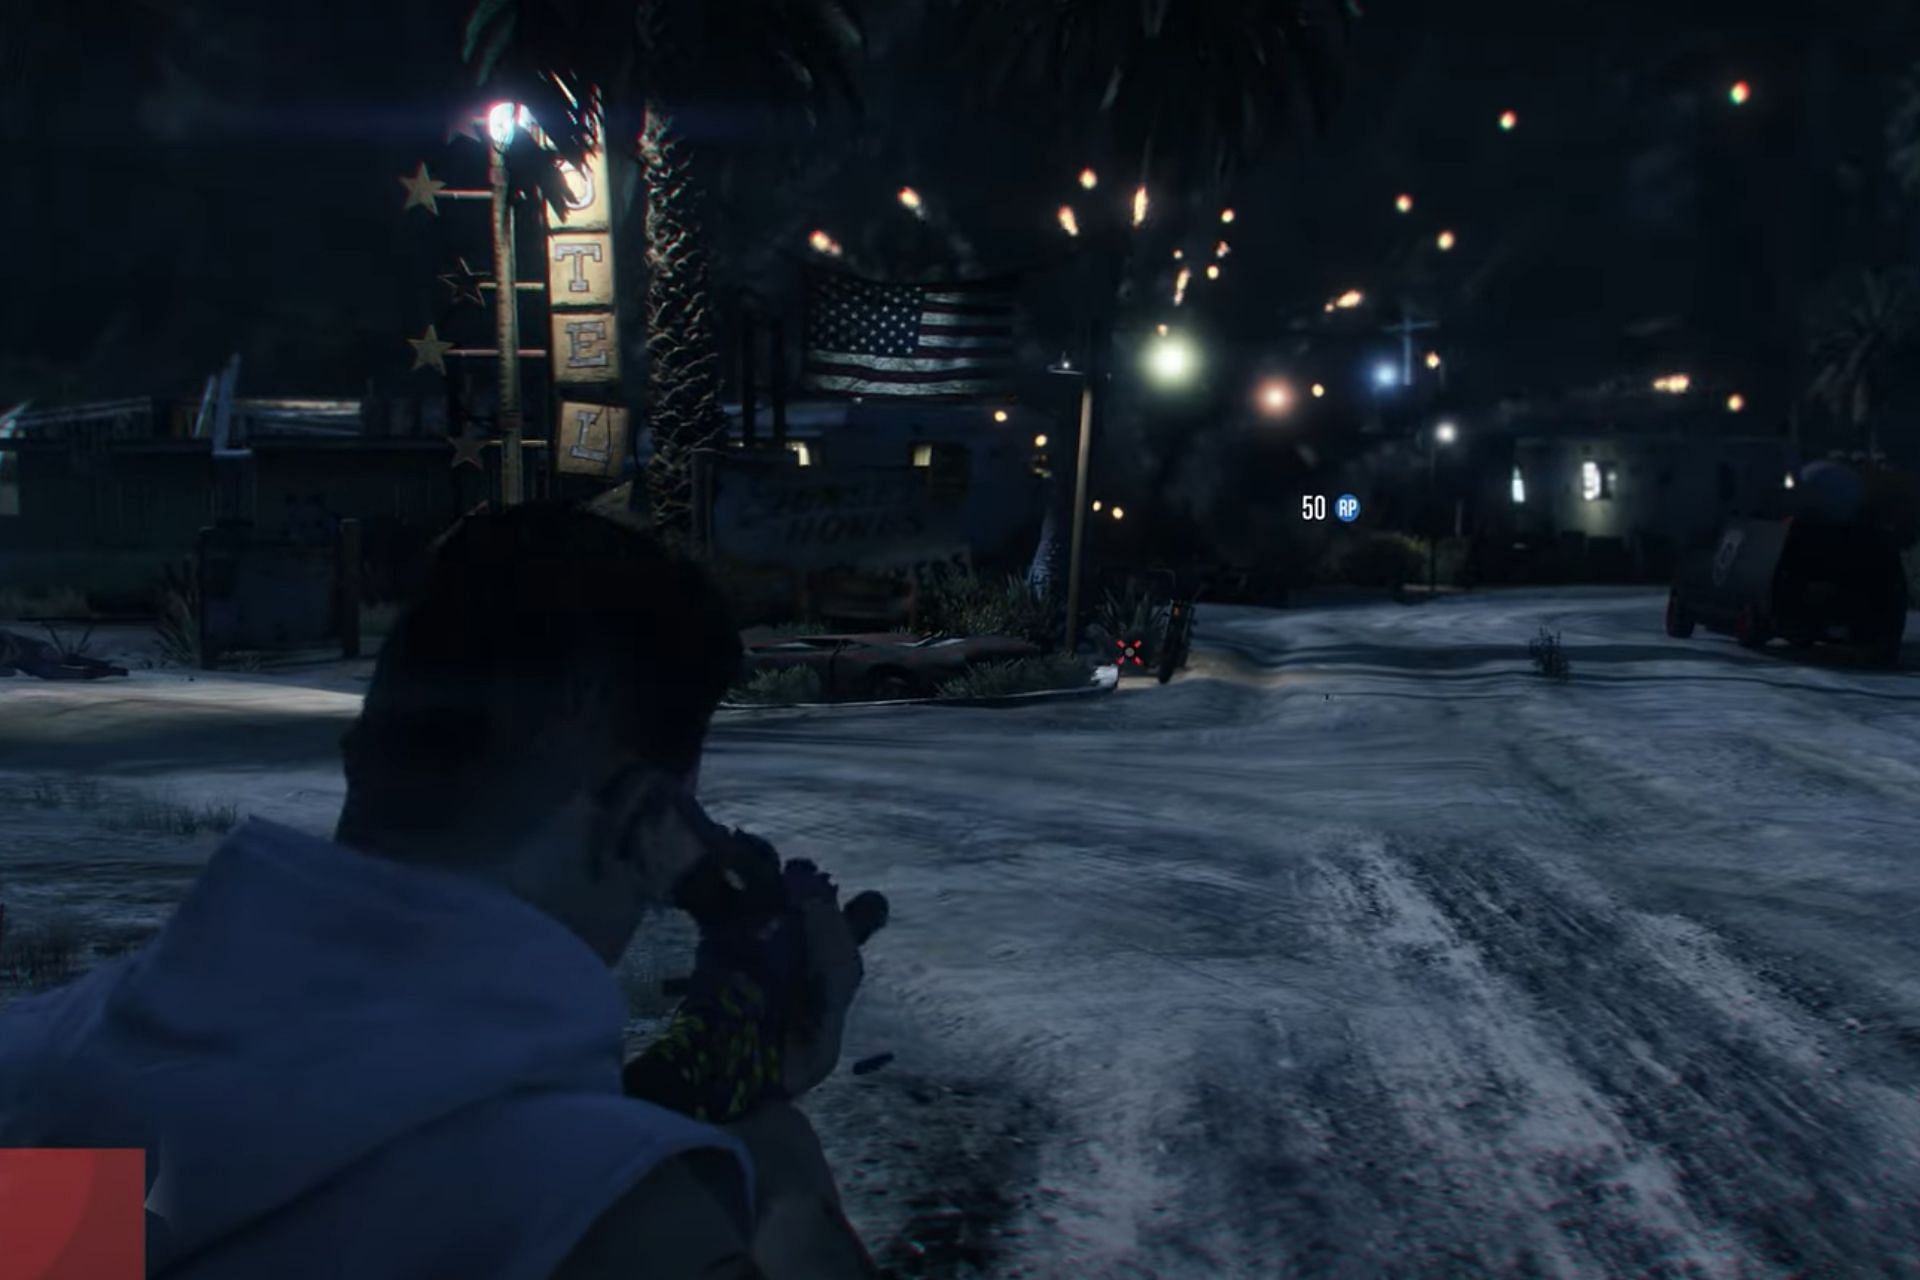 A scene from Stab City in the Fatal Incursion mission (Image via YouTube)